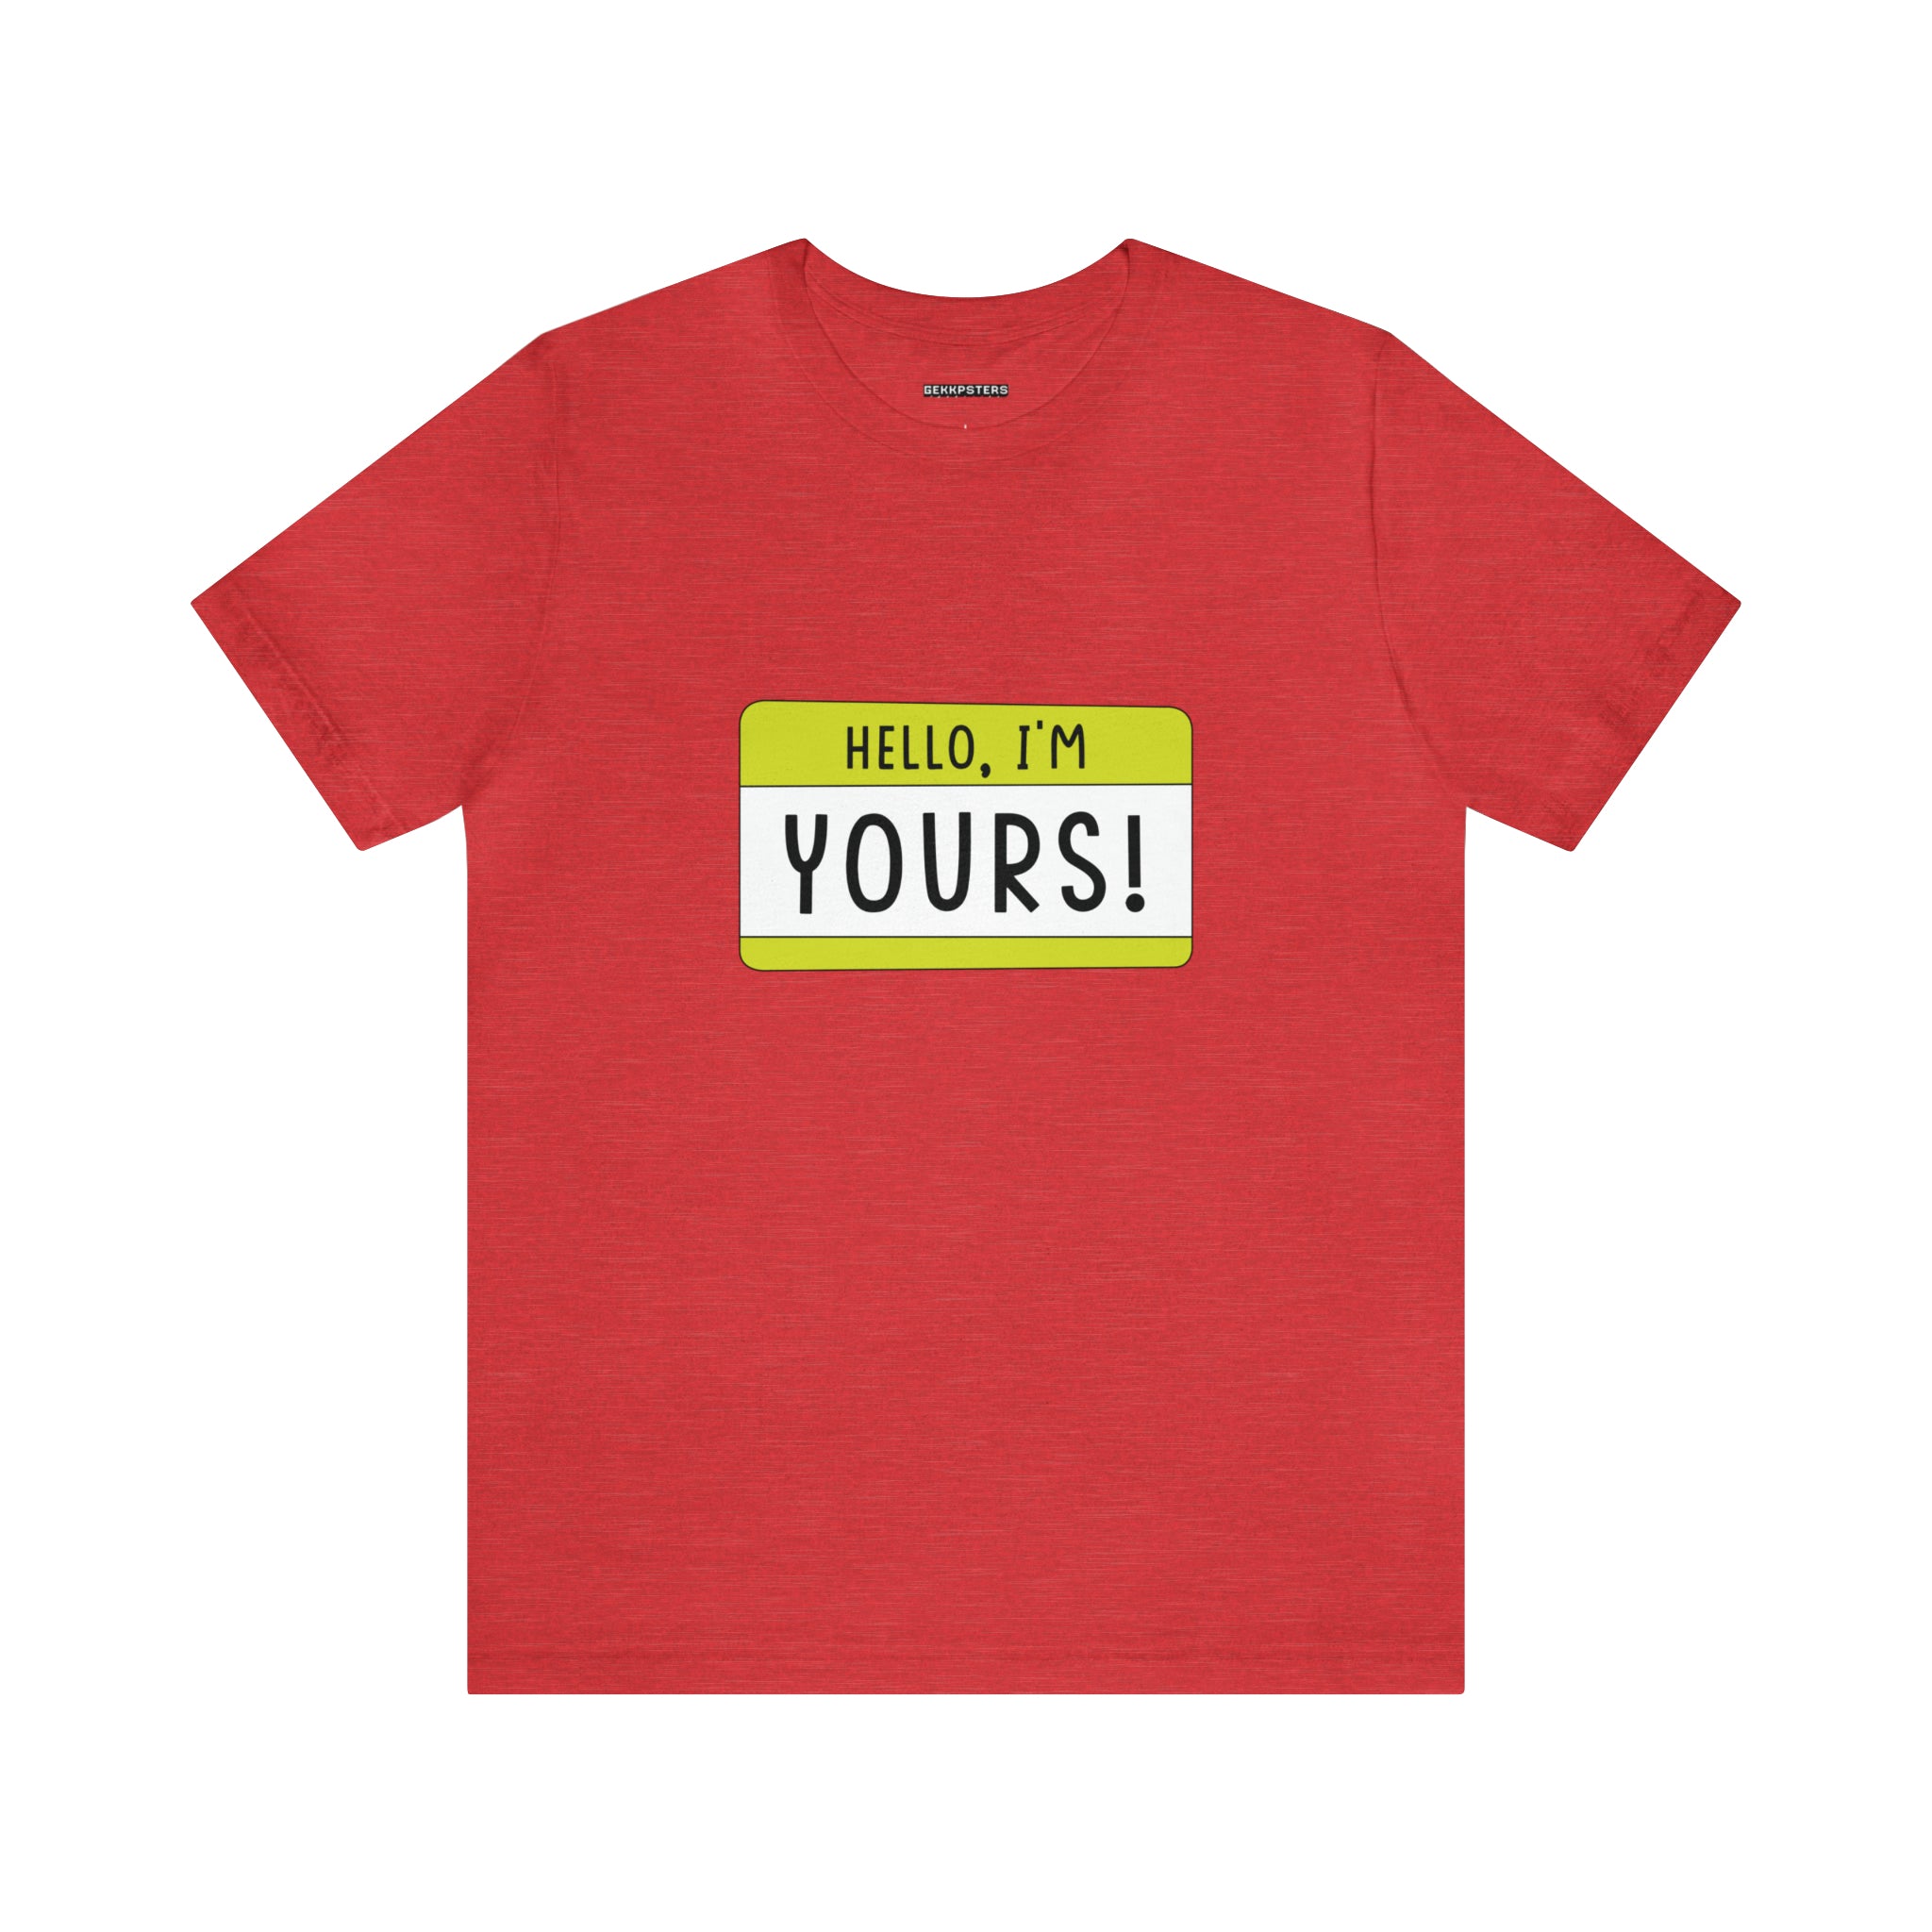 Hello, I'm YOURS T-Shirt with a yellow name tag graphic that reads "hello, I'm yours!" on the chest, perfect for any gaming enthusiast.